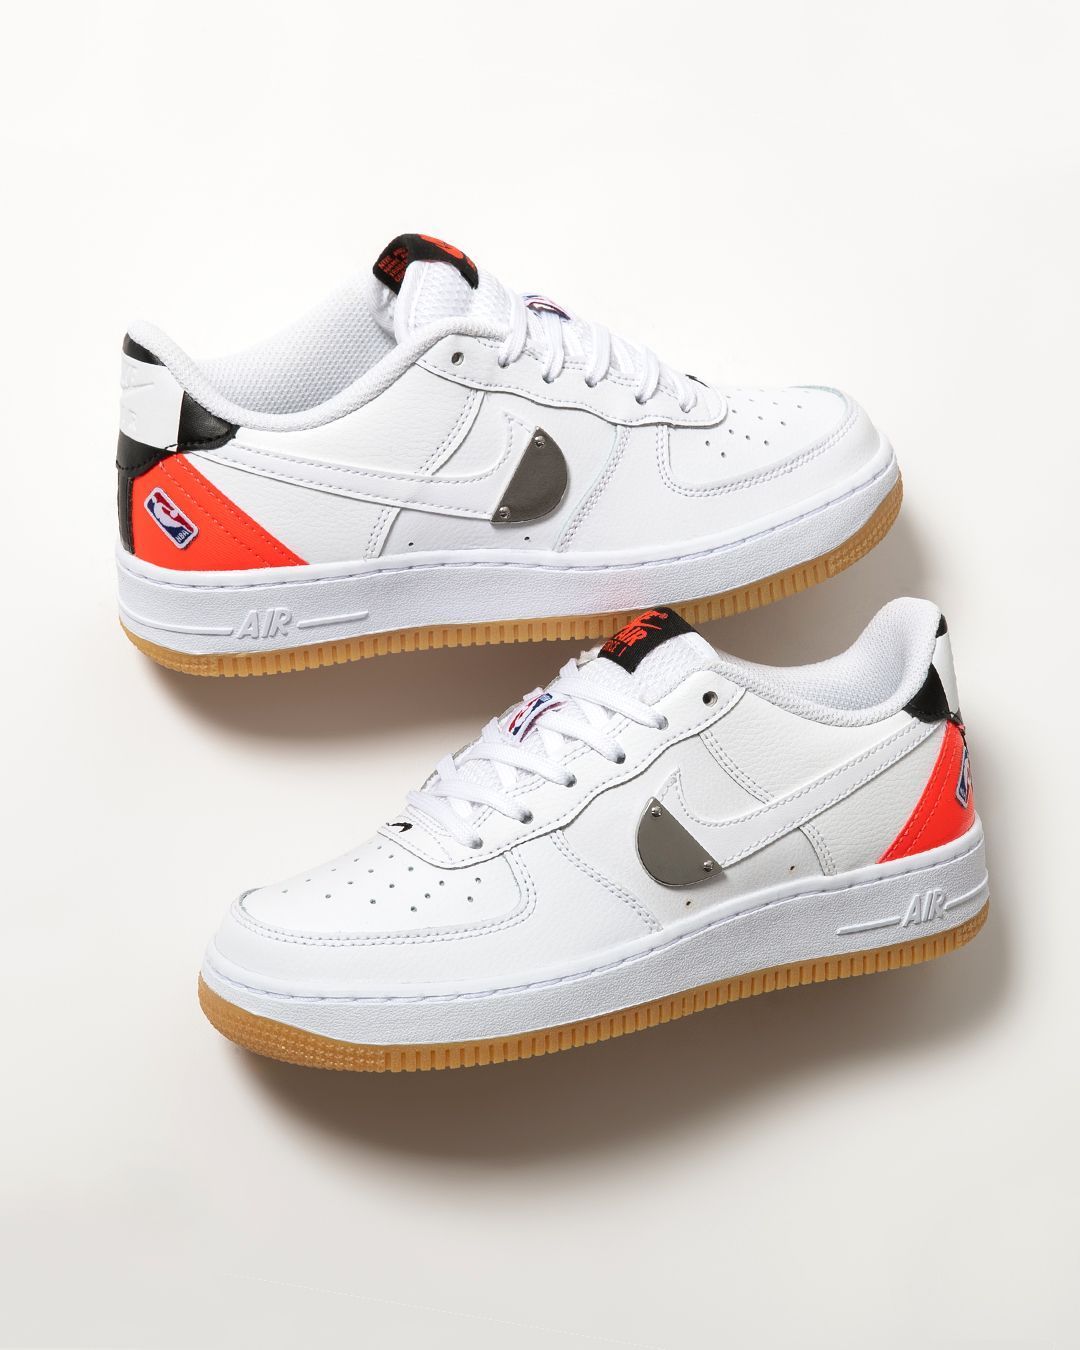 Titolo on X: last sizes 🏀 Nike Air Force 1 Lv8 NBA available